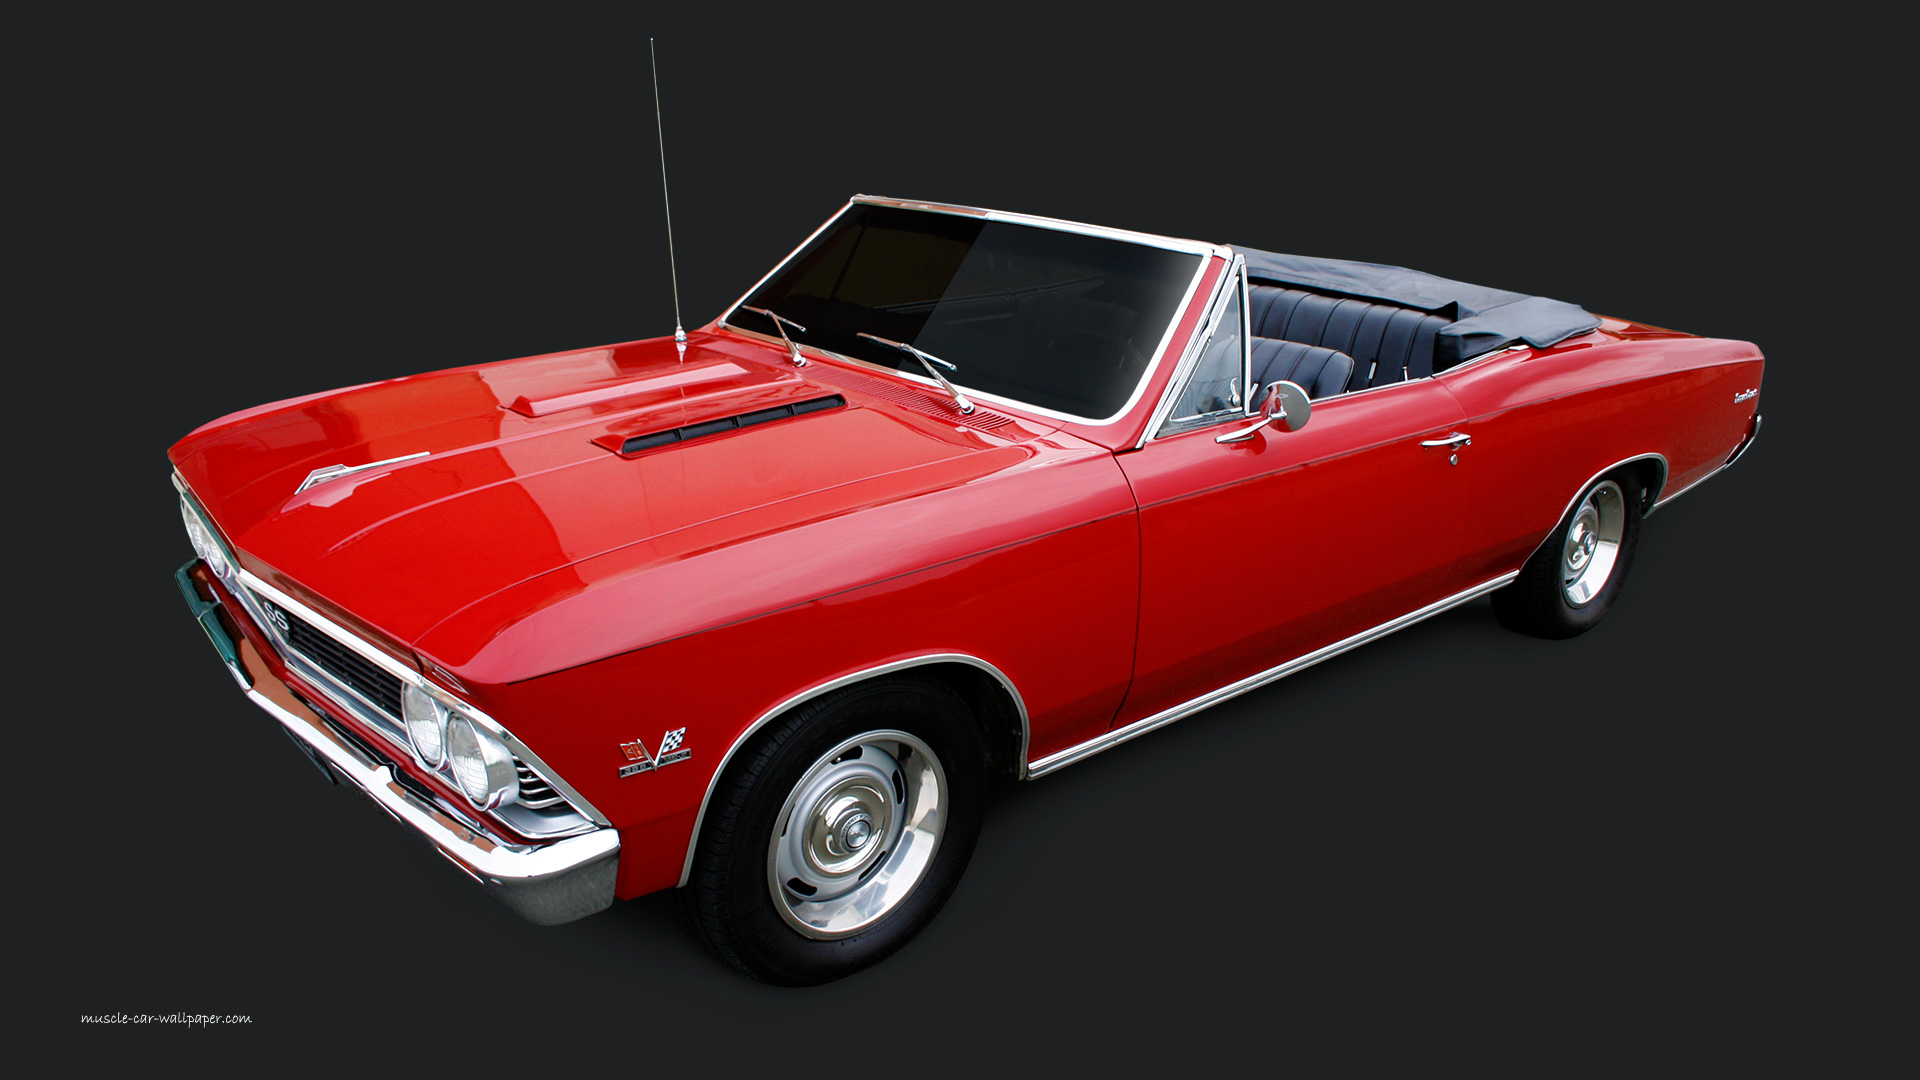 1970 chevelle ss wallpaper red convertible 1920 05